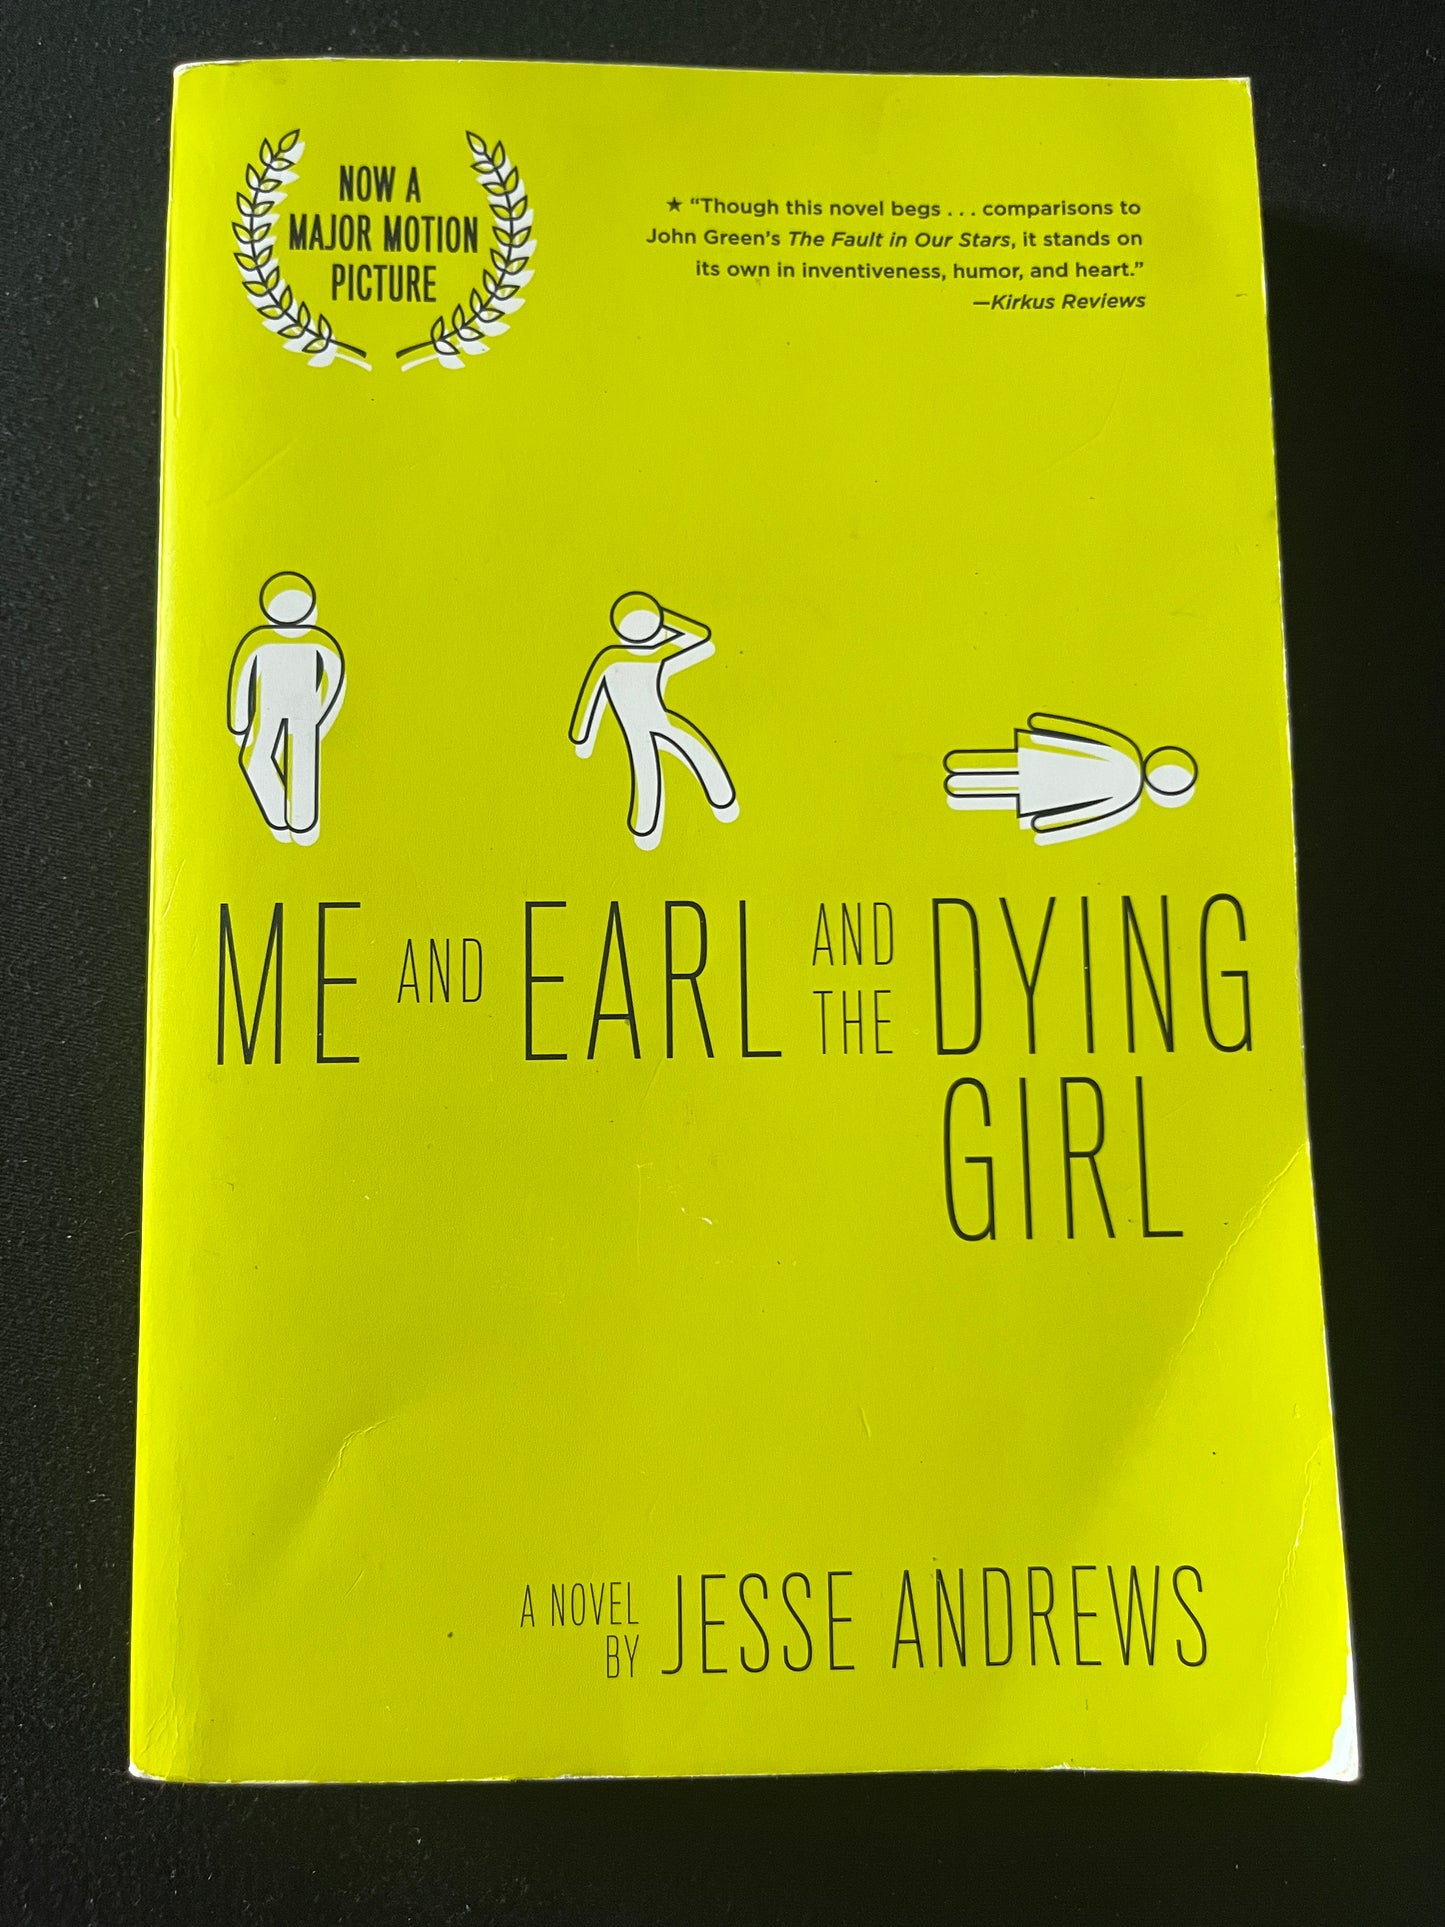 ME AND EARL AND THE DYING GIRL by Jesse Andrews